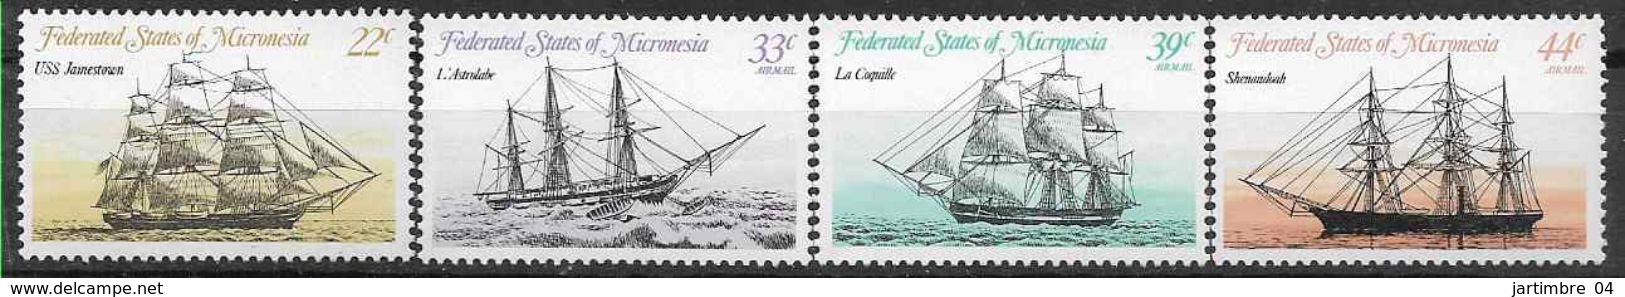 1985 MICRONESIE 26+ PA 7-9** Bateaux, Voiliers - Micronesia